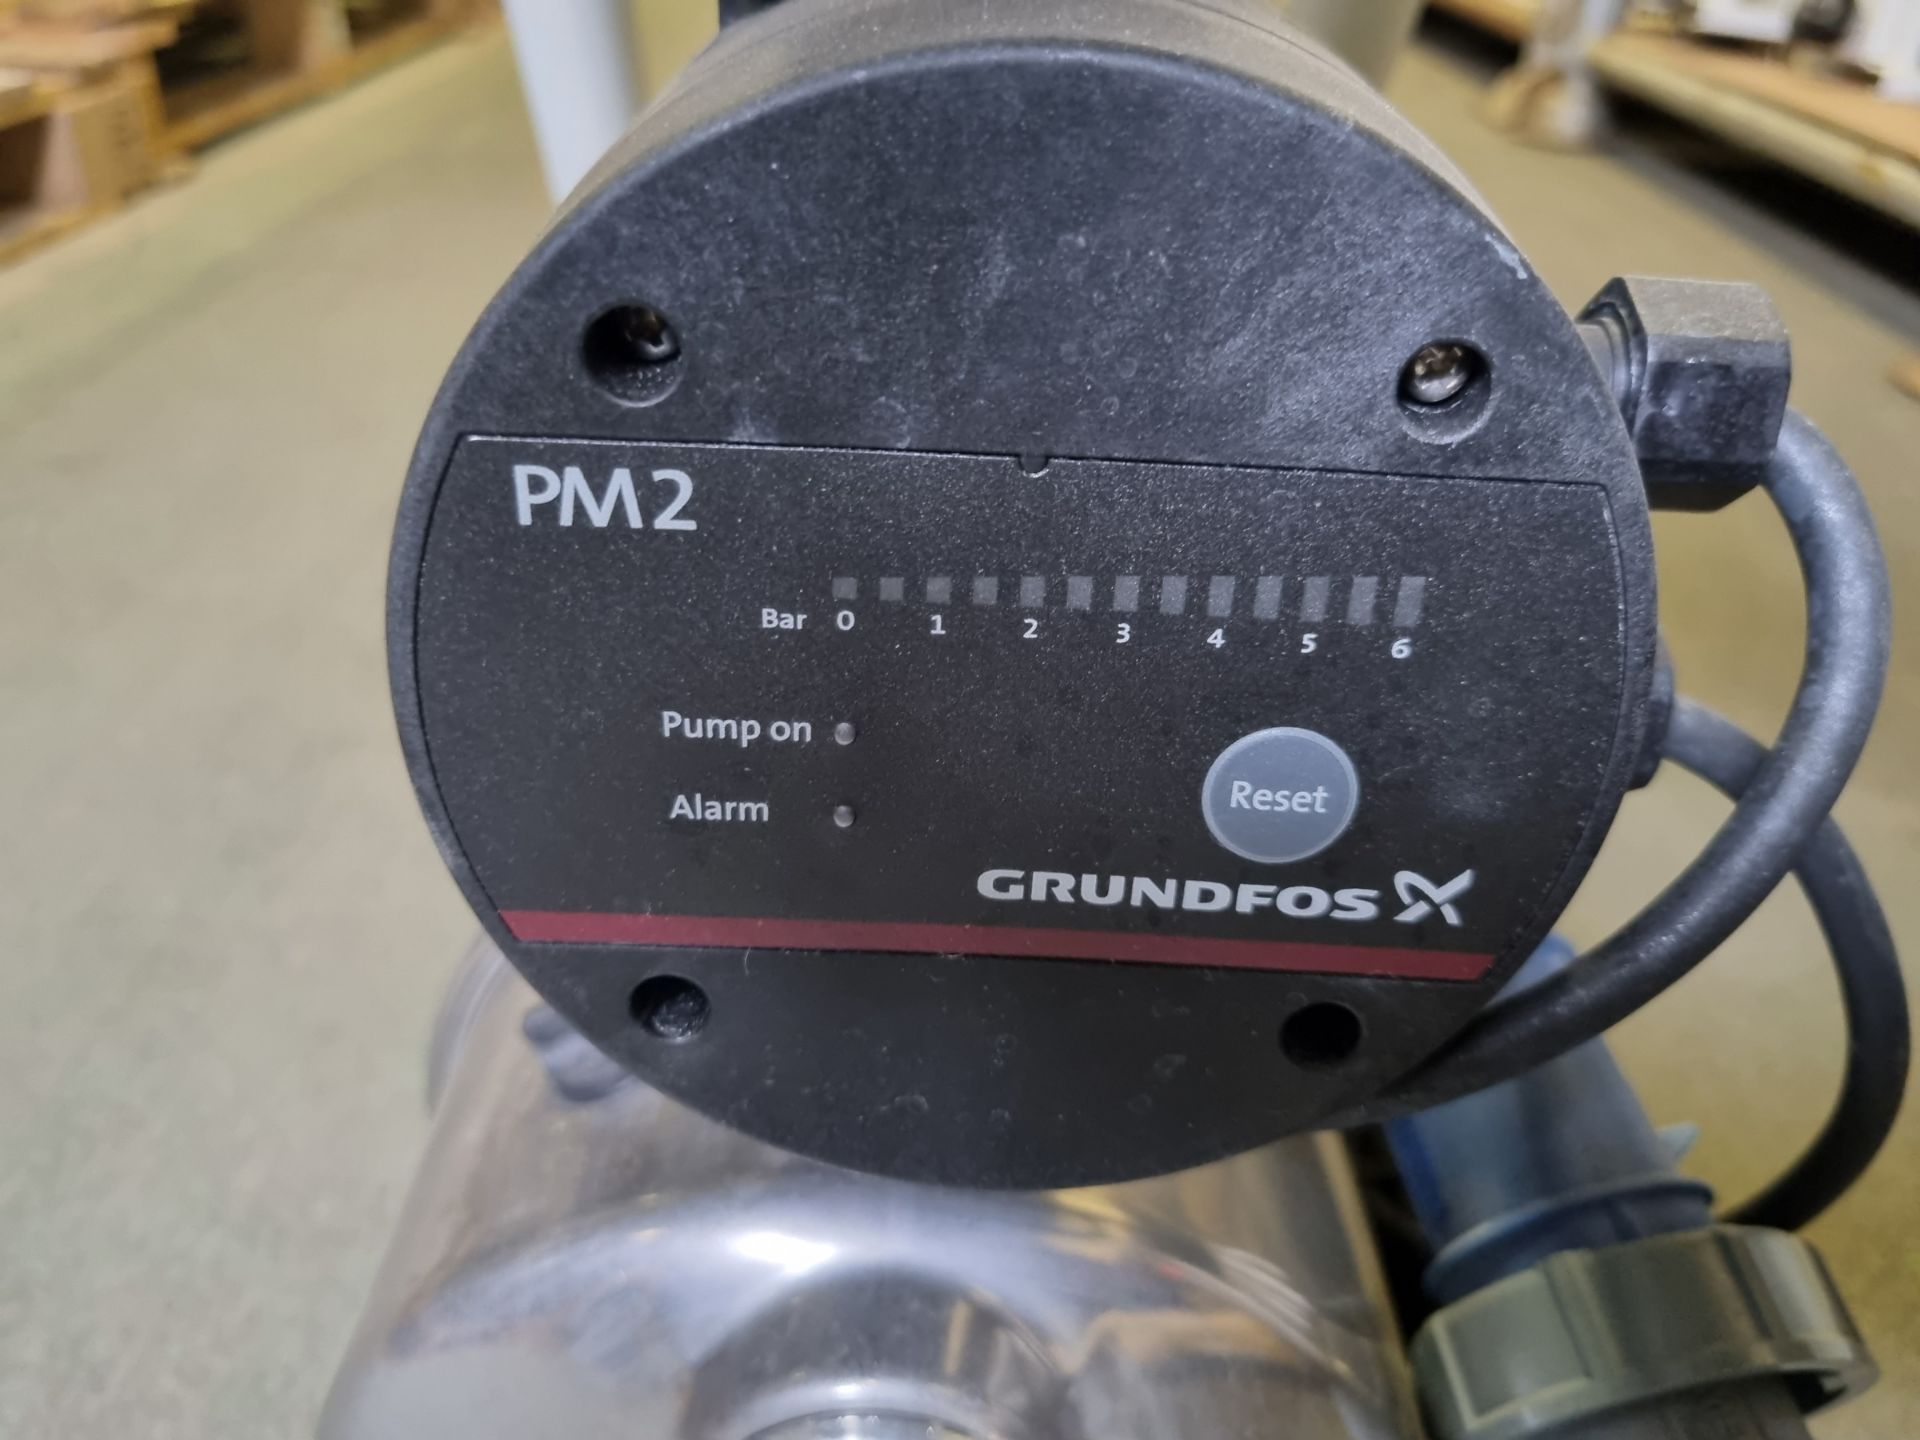 Grundfos JP 5 A-A-CVBP Horizontal Multi-stage Pump with Grundfos X PM 2 AD pressure manager - Image 4 of 6